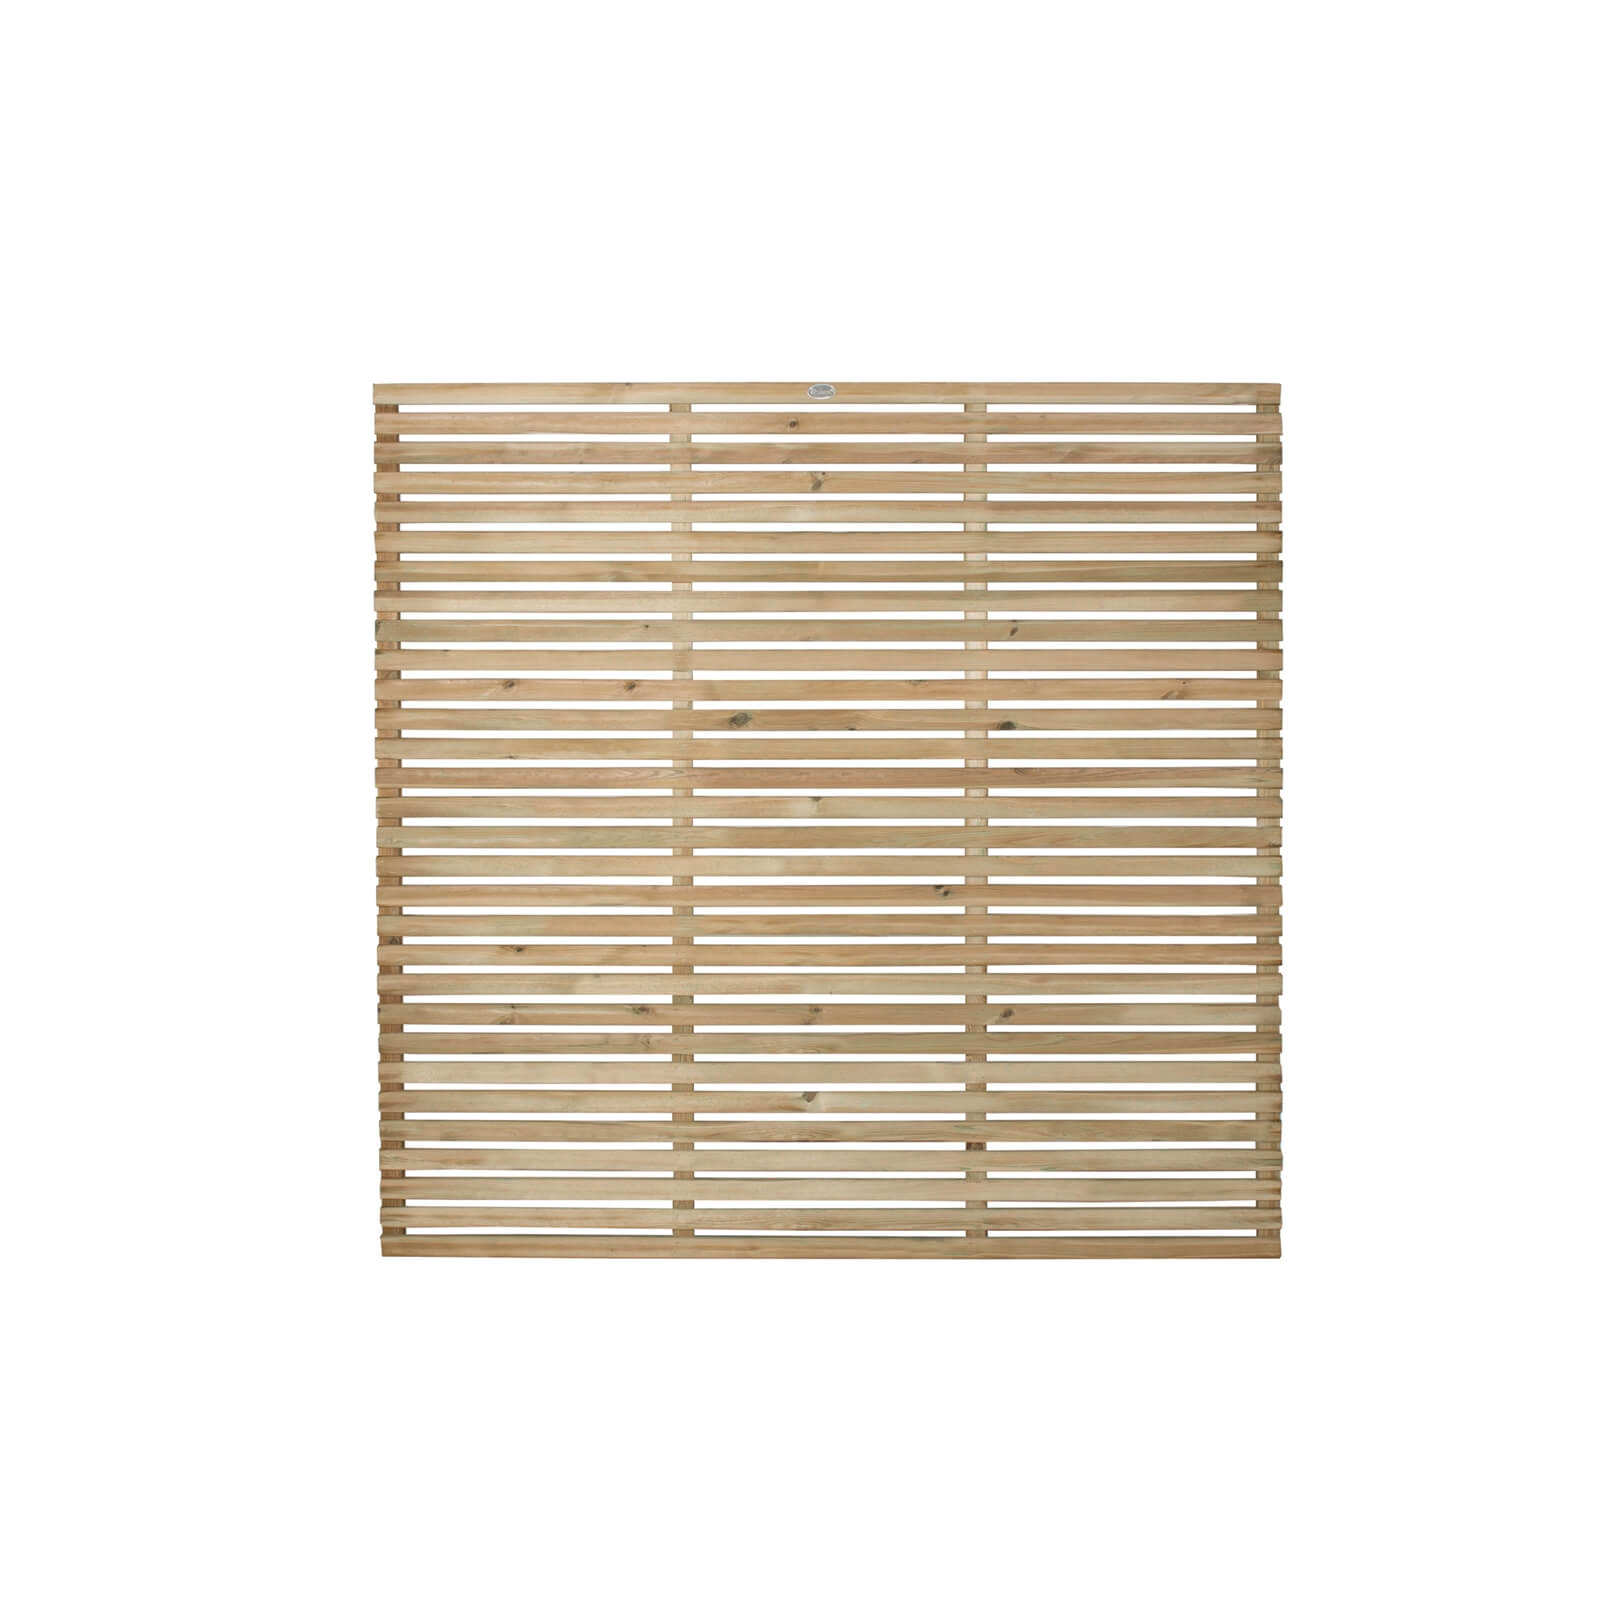 Forest Slatted Fence Panel - 6ft - Pack of 5